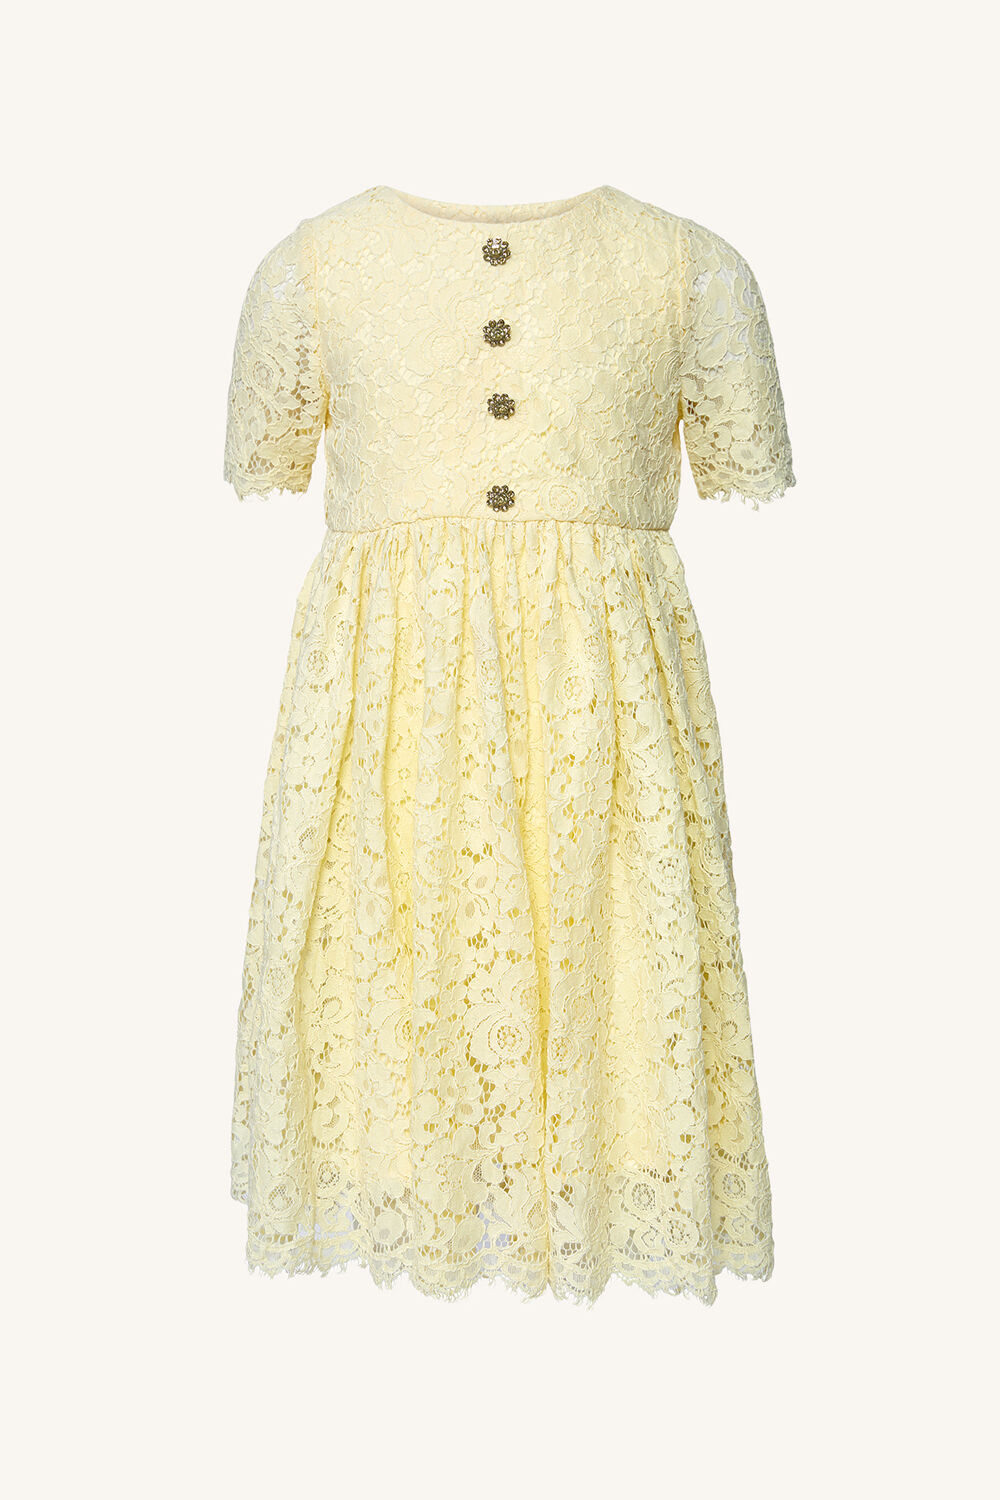 Girls BAILEE LACE DRESS in colour BUTTERCUP